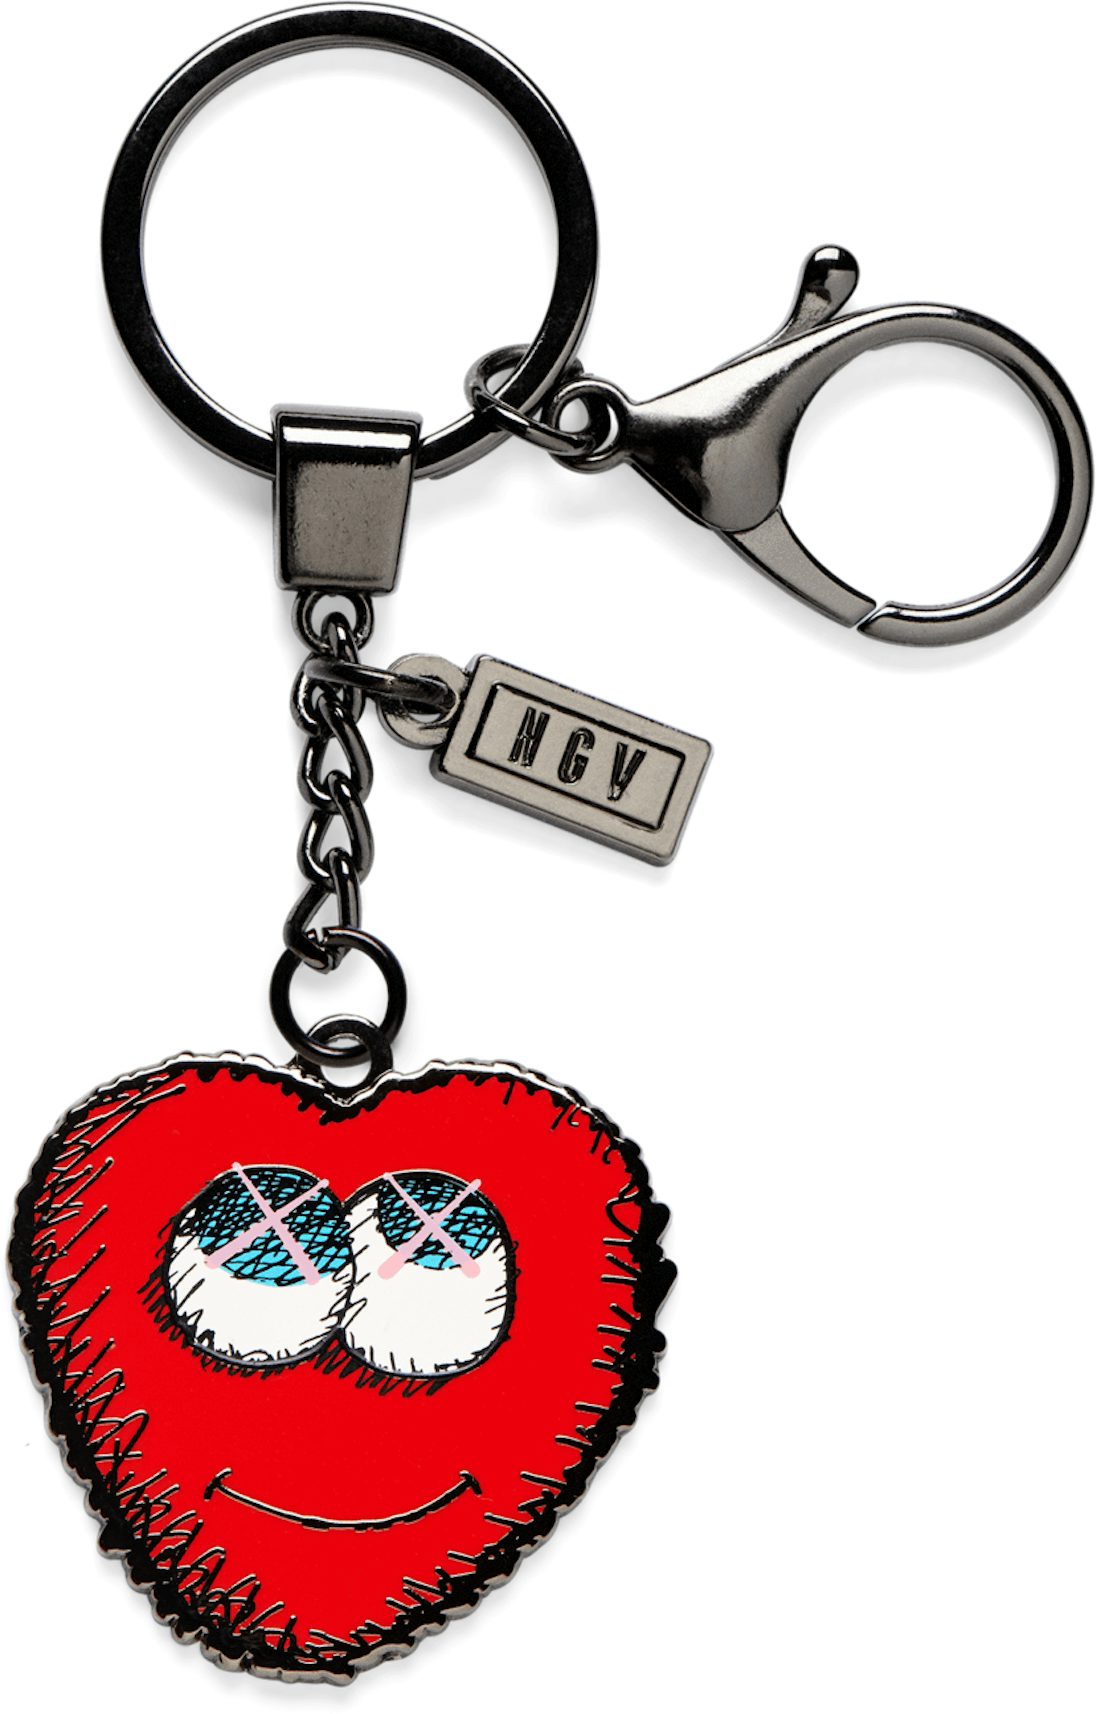 Wholesale Red Heart Keychain Clip